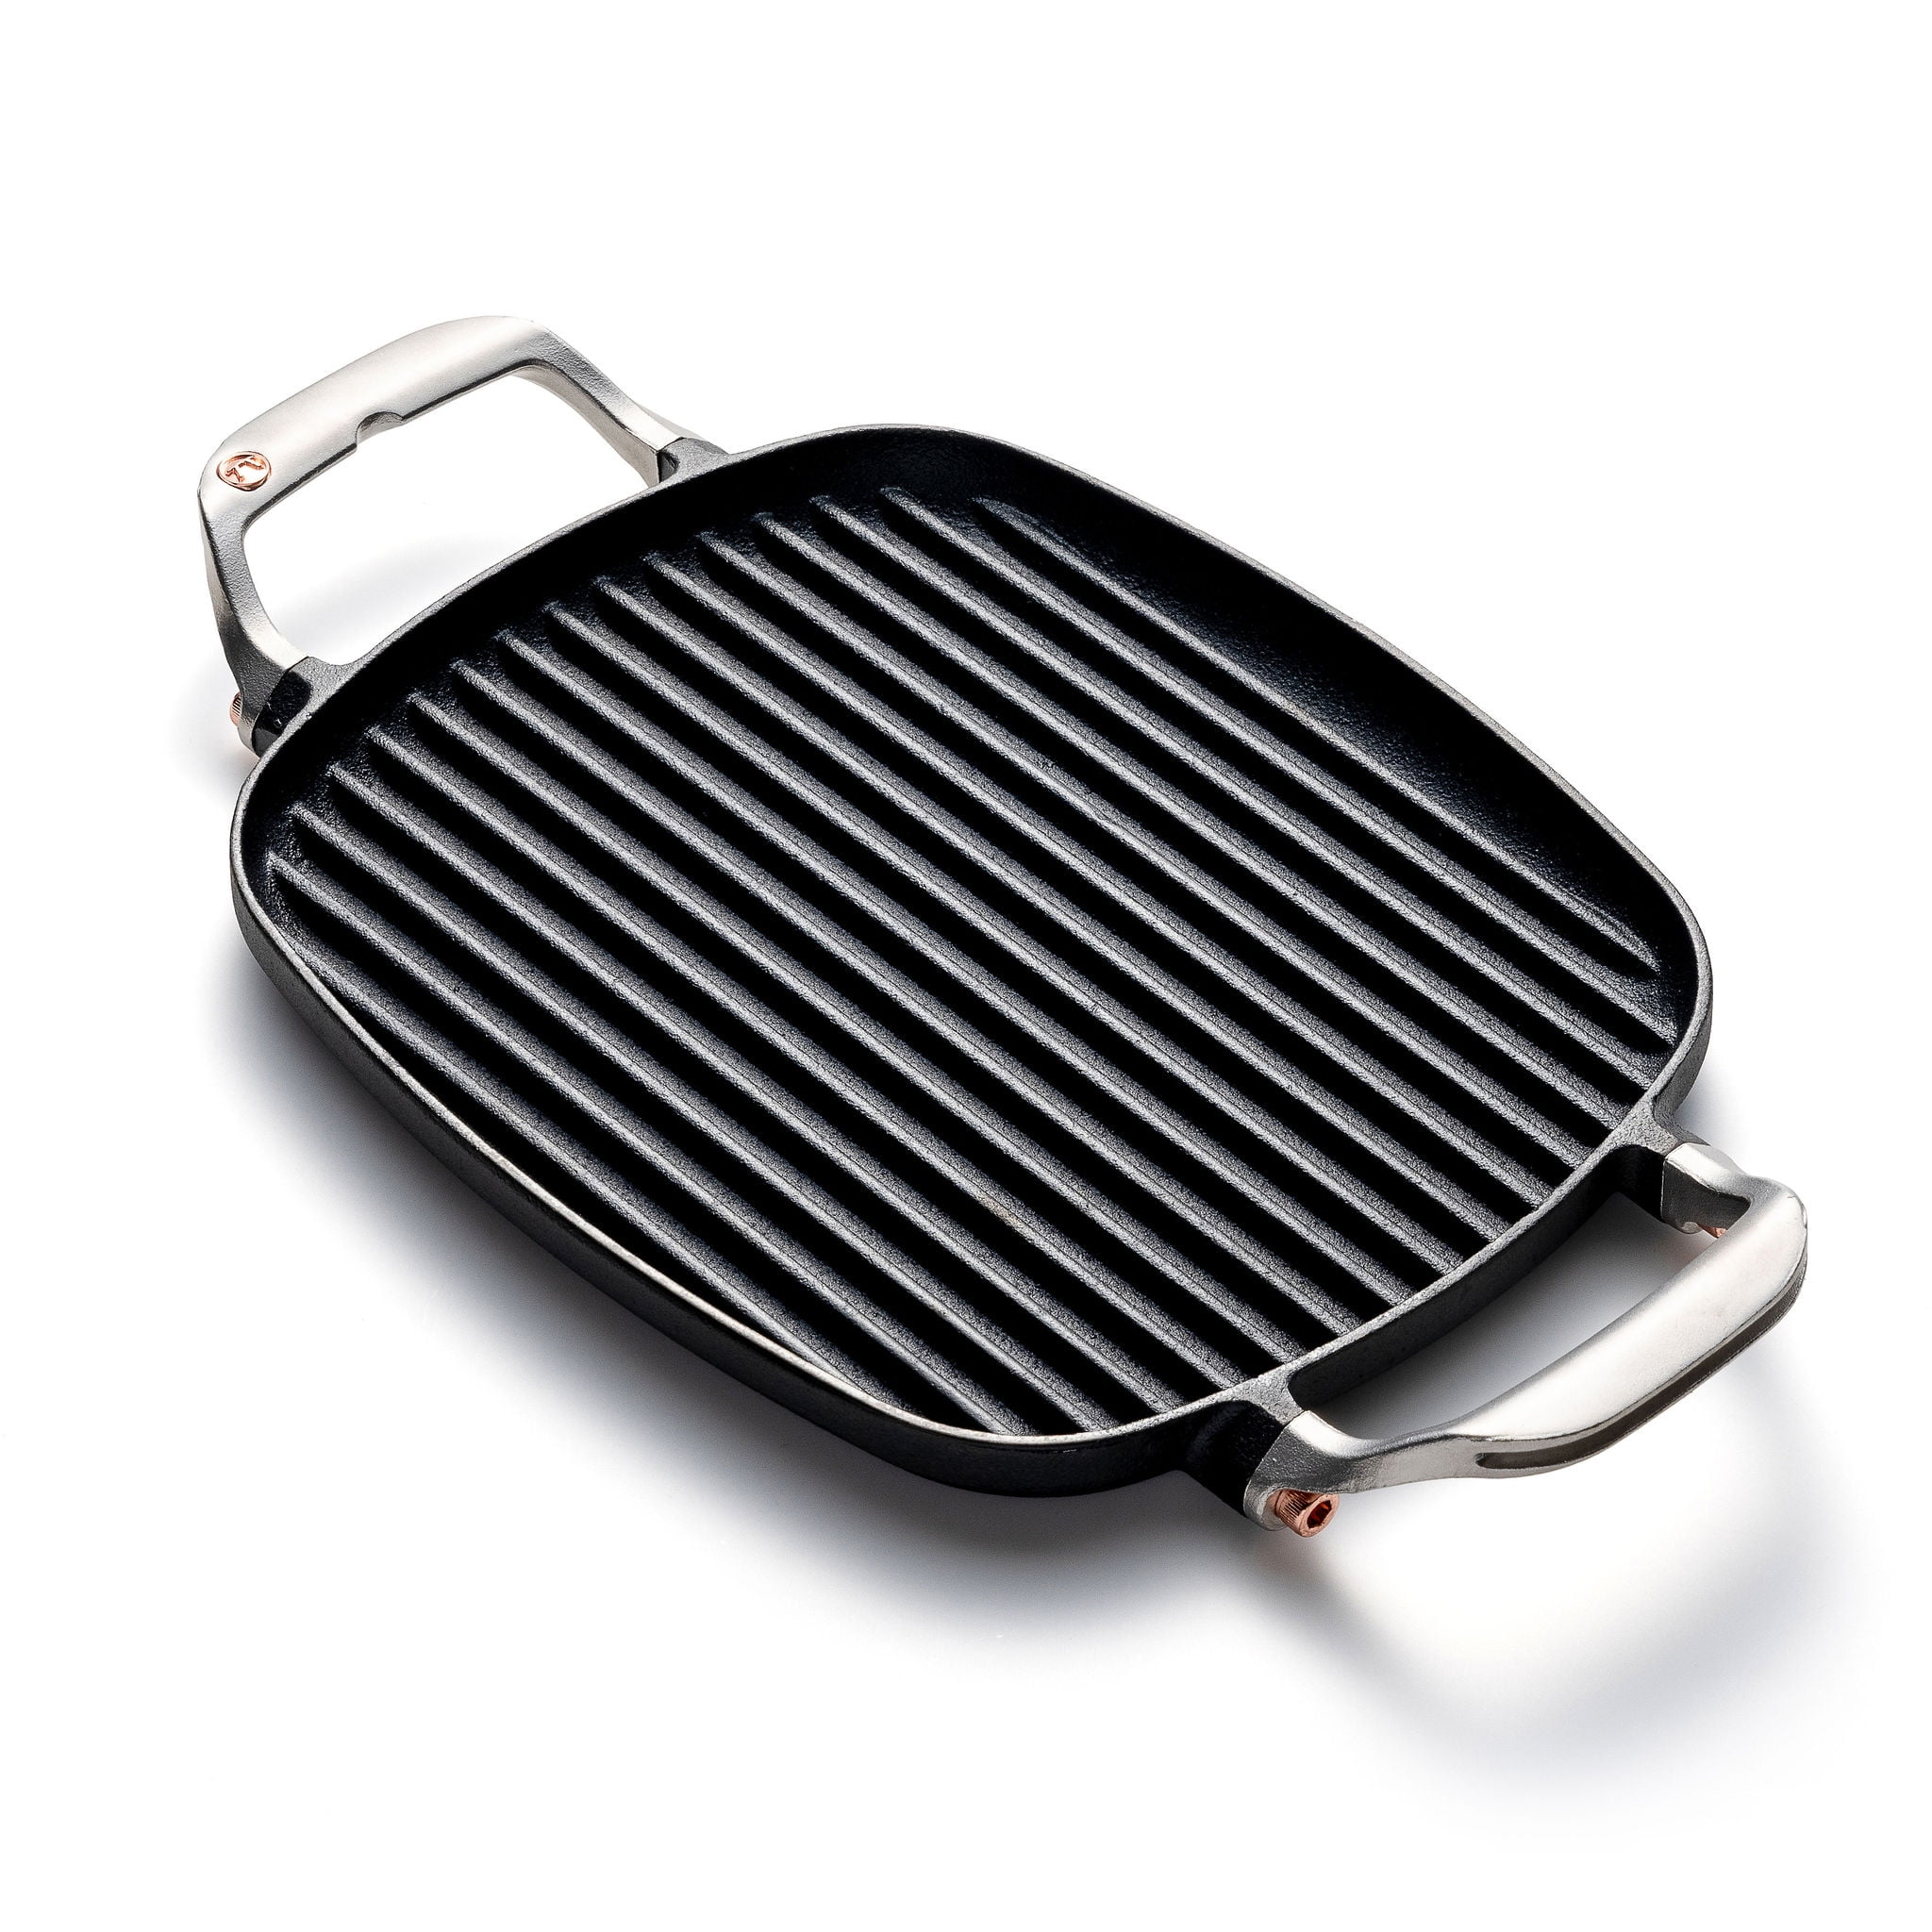 CUISINEL Versatile Pre Seasoned 10.5 in. Cast Iron Square Grill Pan with  Glass Lid C10-SG-G - The Home Depot